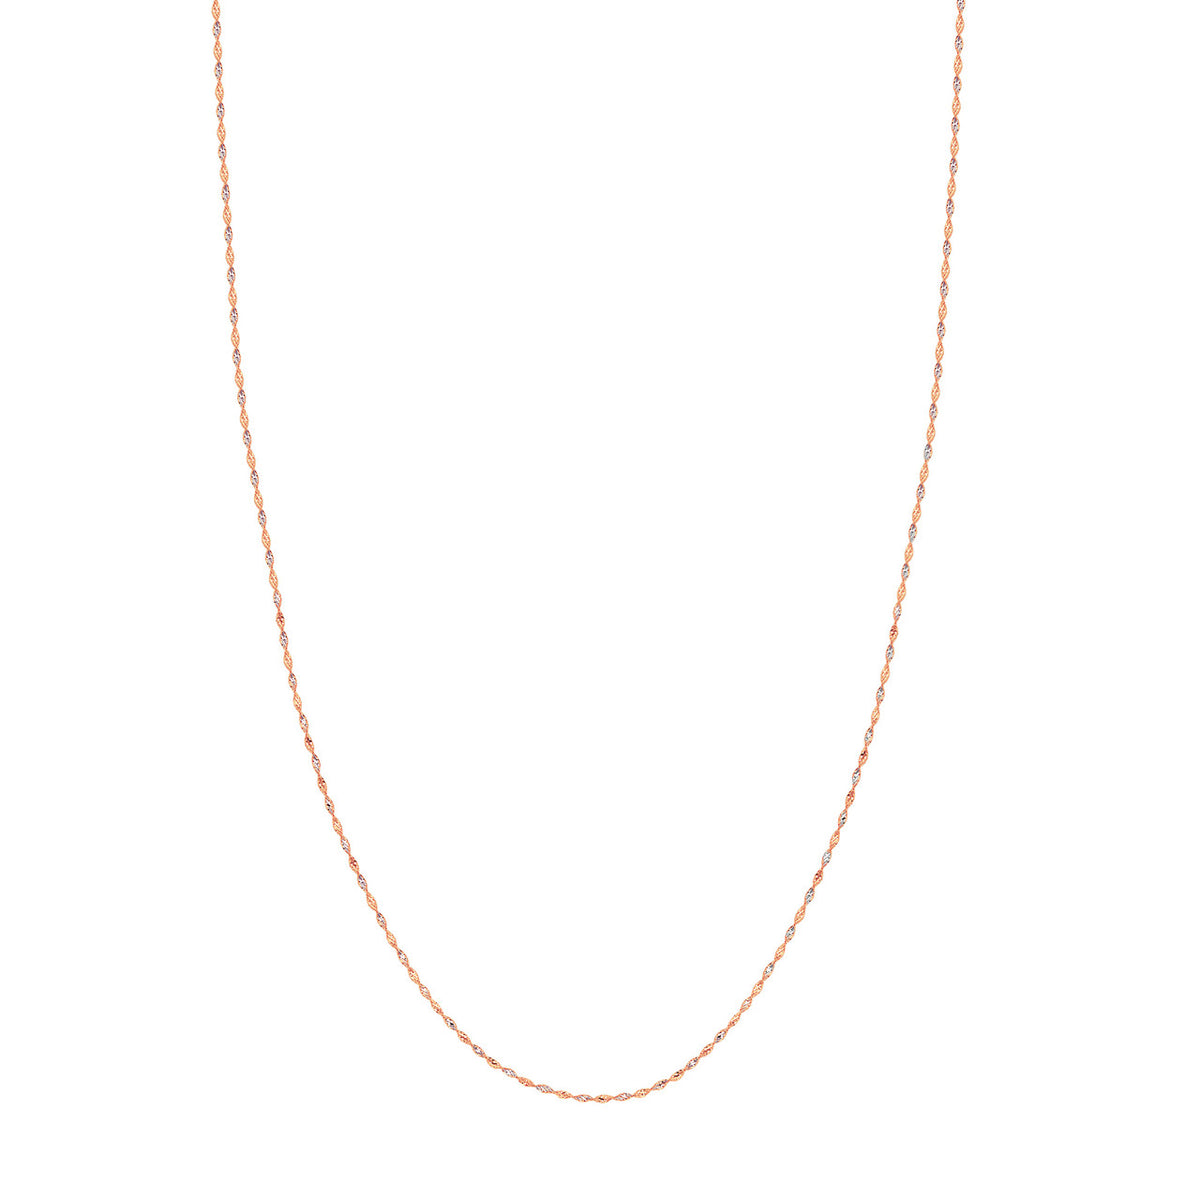 14K Rose White Gold 1.35mm Two-Tone Dorica Chain Necklace with Lobster Lock